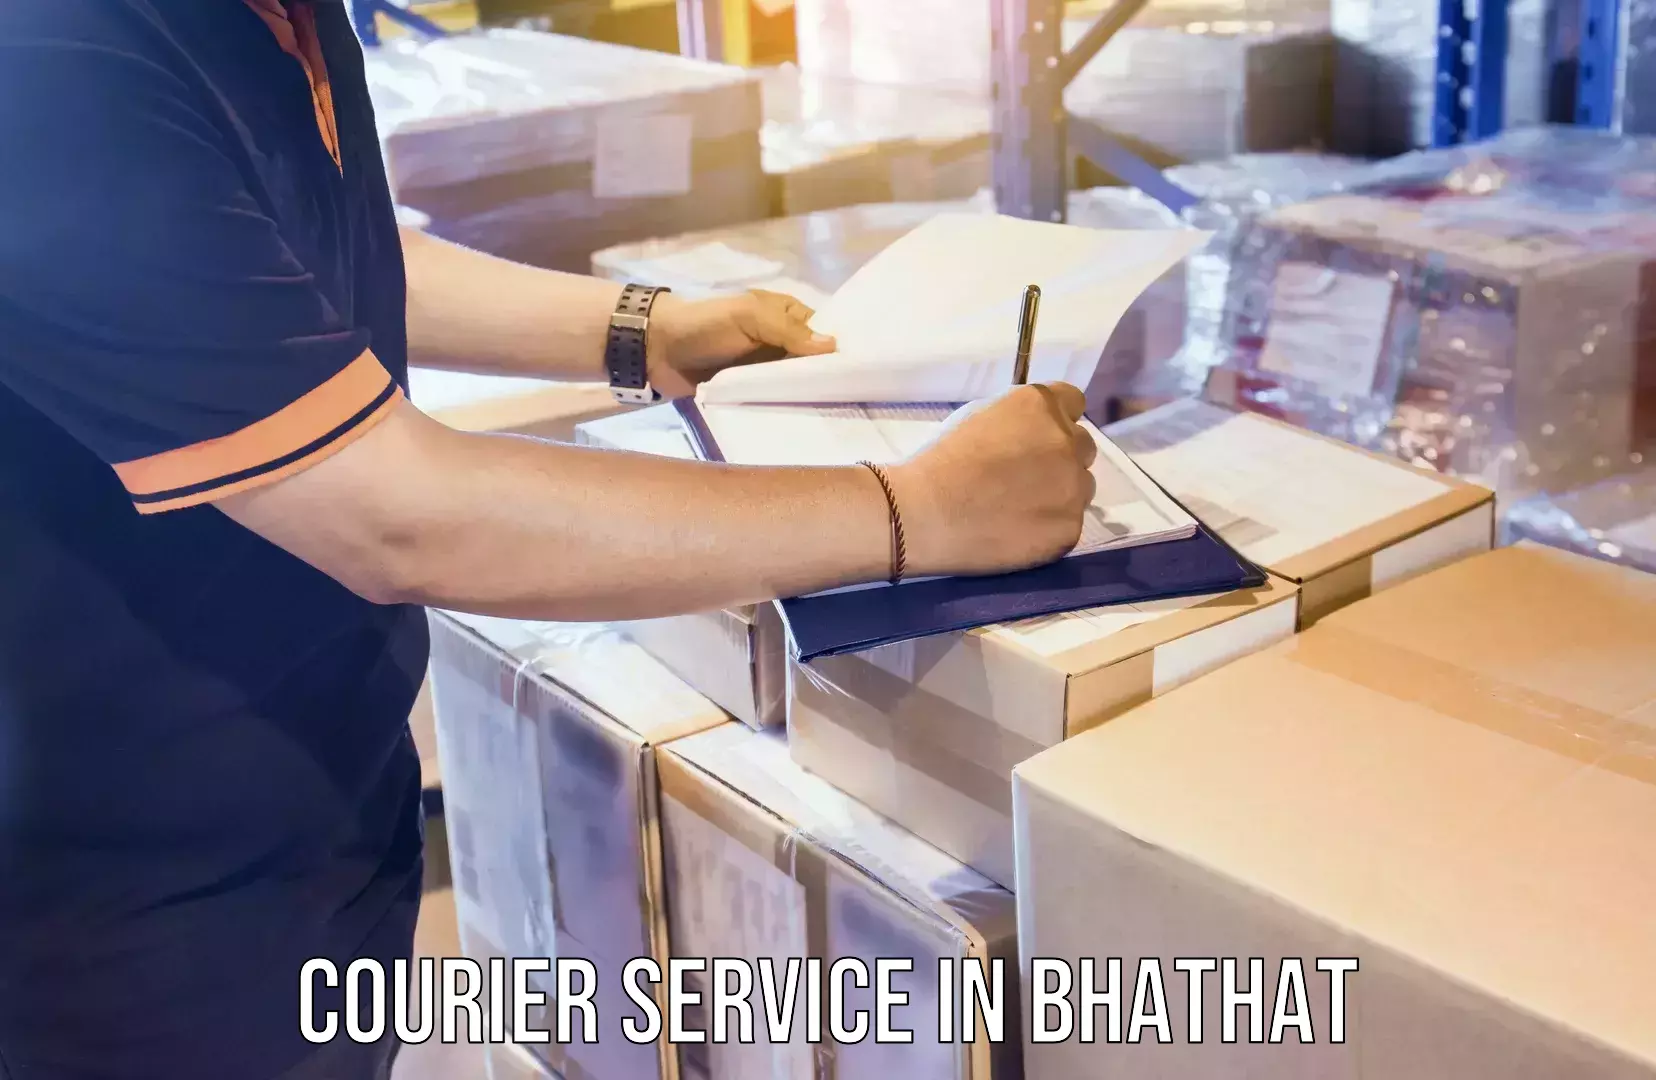 Multi-national courier services in Bhathat